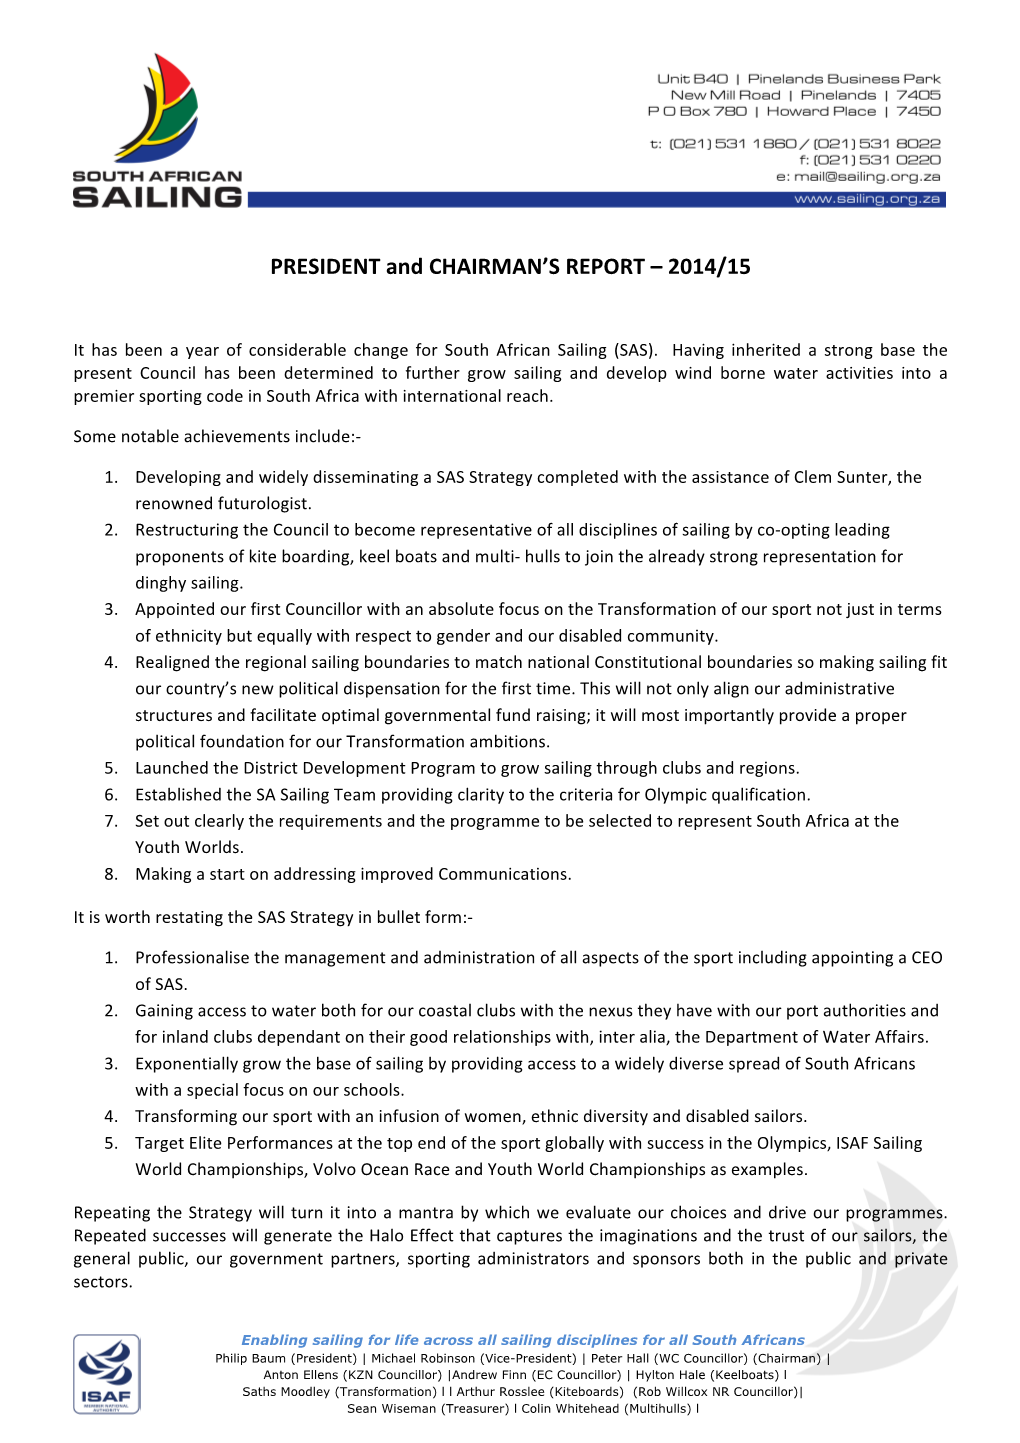 2015 President and Chairman's Report